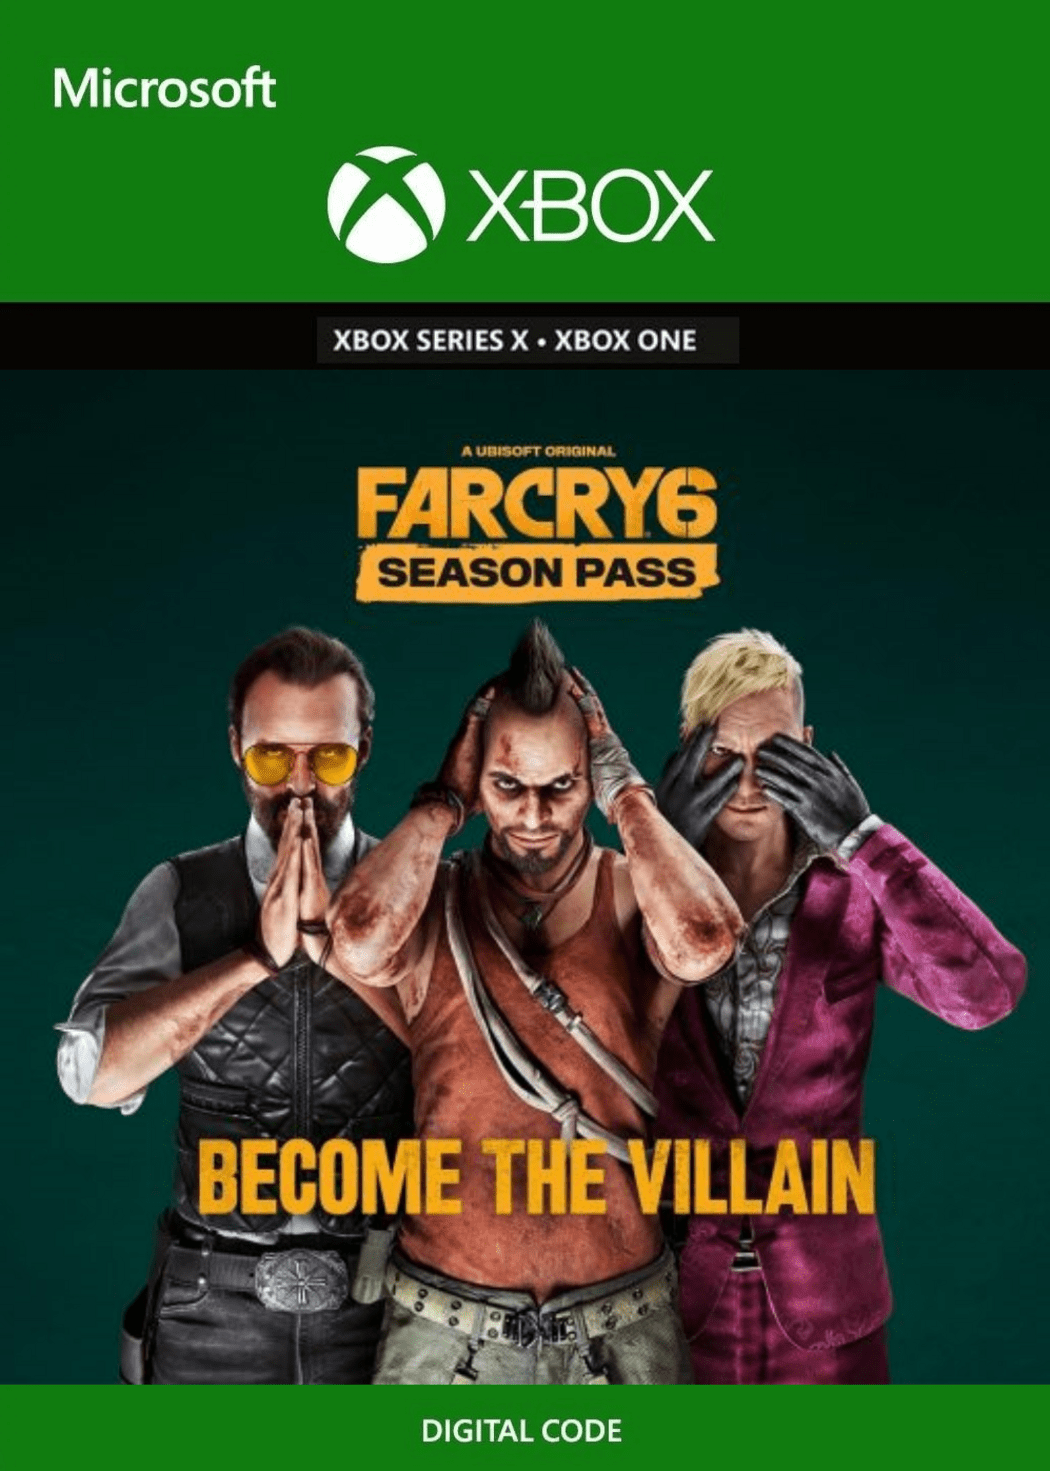 Buy Far Cry 4 - Escape From Durgesh Prison DLC (Digital Code only) Online  at Low Prices in India